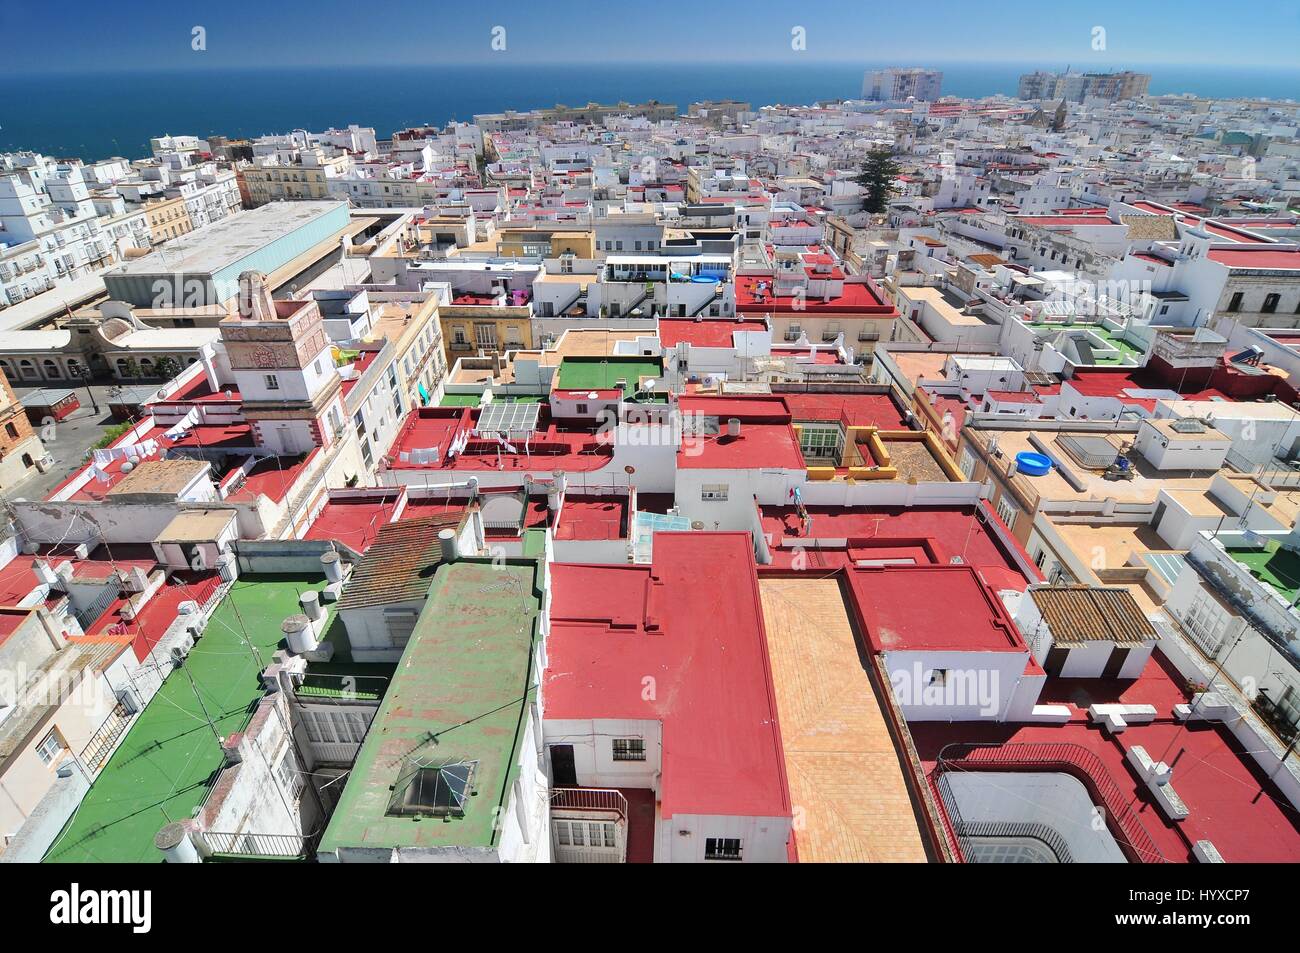 View from Torre Tavira tower to colorful roofs of Cadiz, Costa de la Luz, Andalusia, Spain Stock Photo